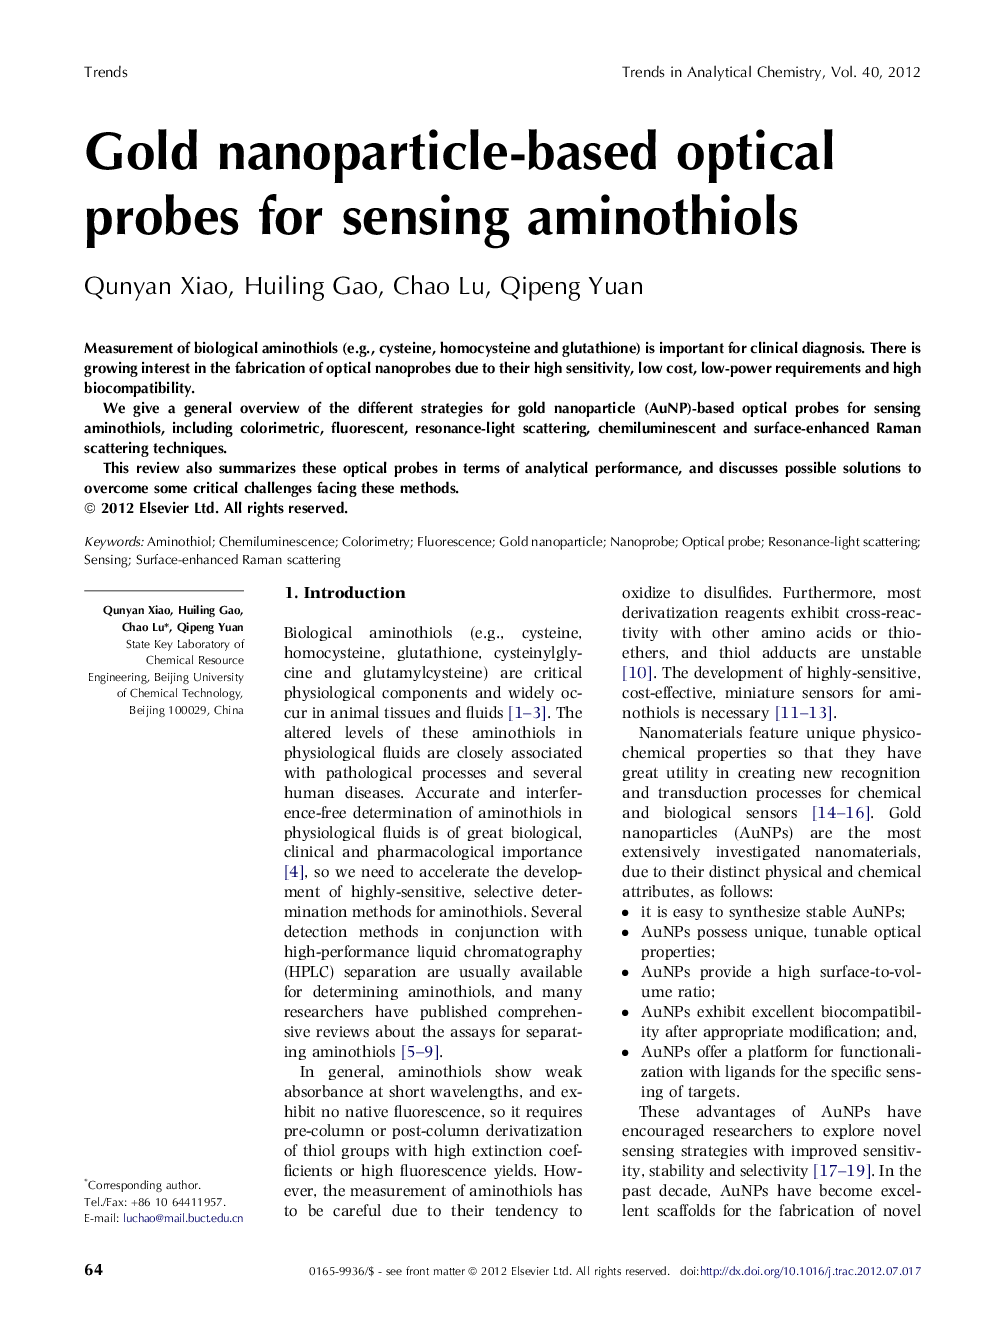 Gold nanoparticle-based optical probes for sensing aminothiols